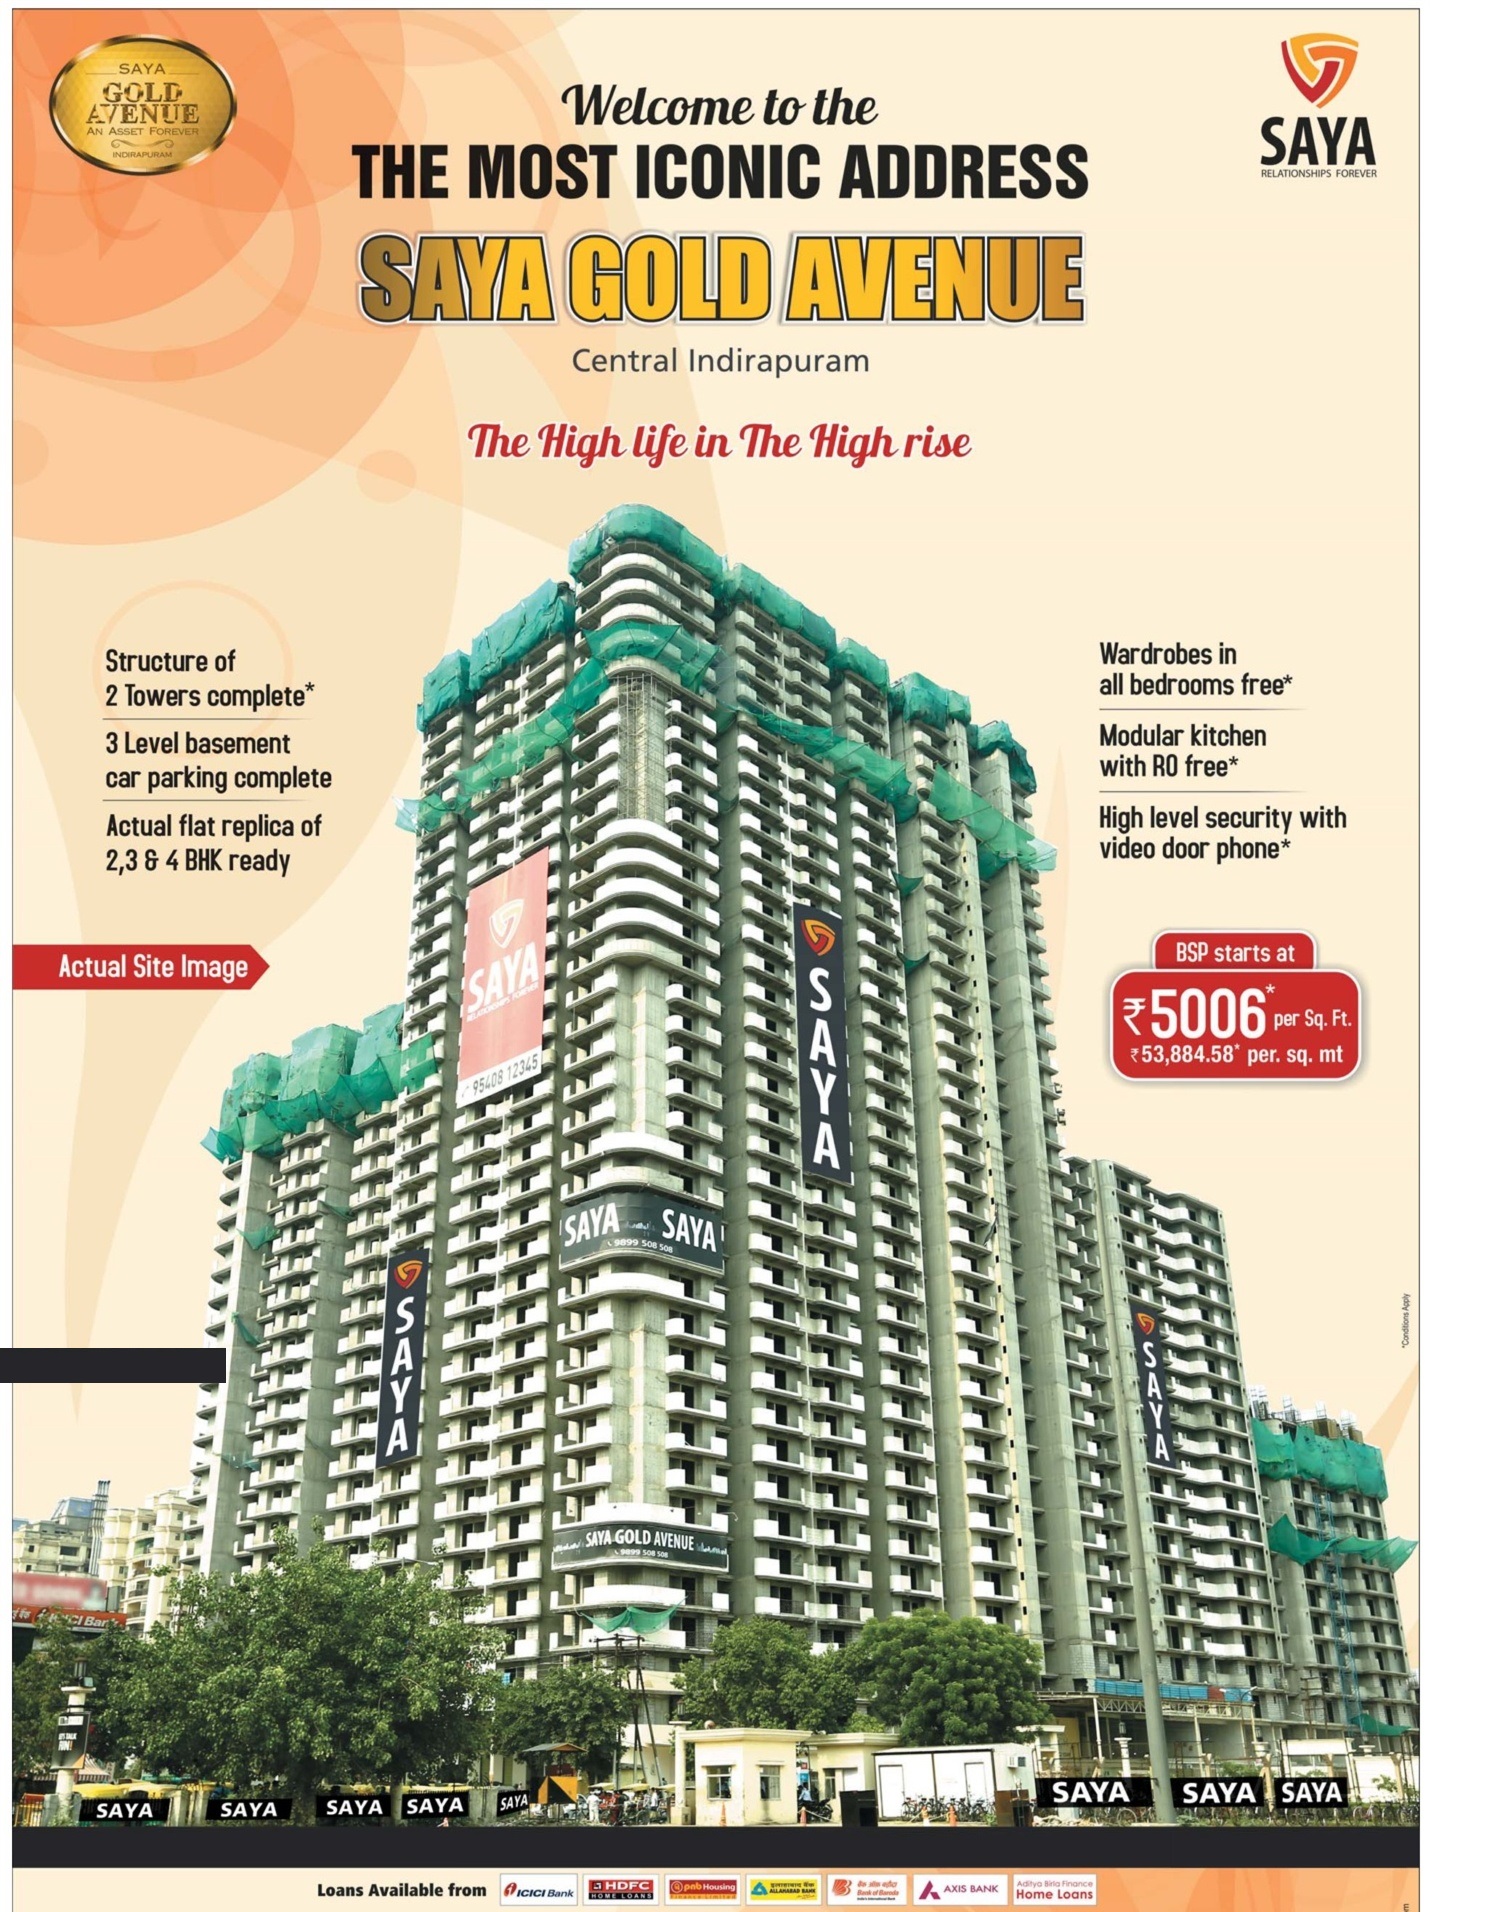 Welcome to the Most Iconic Address Saya Gold Avenue, Ghaziabad